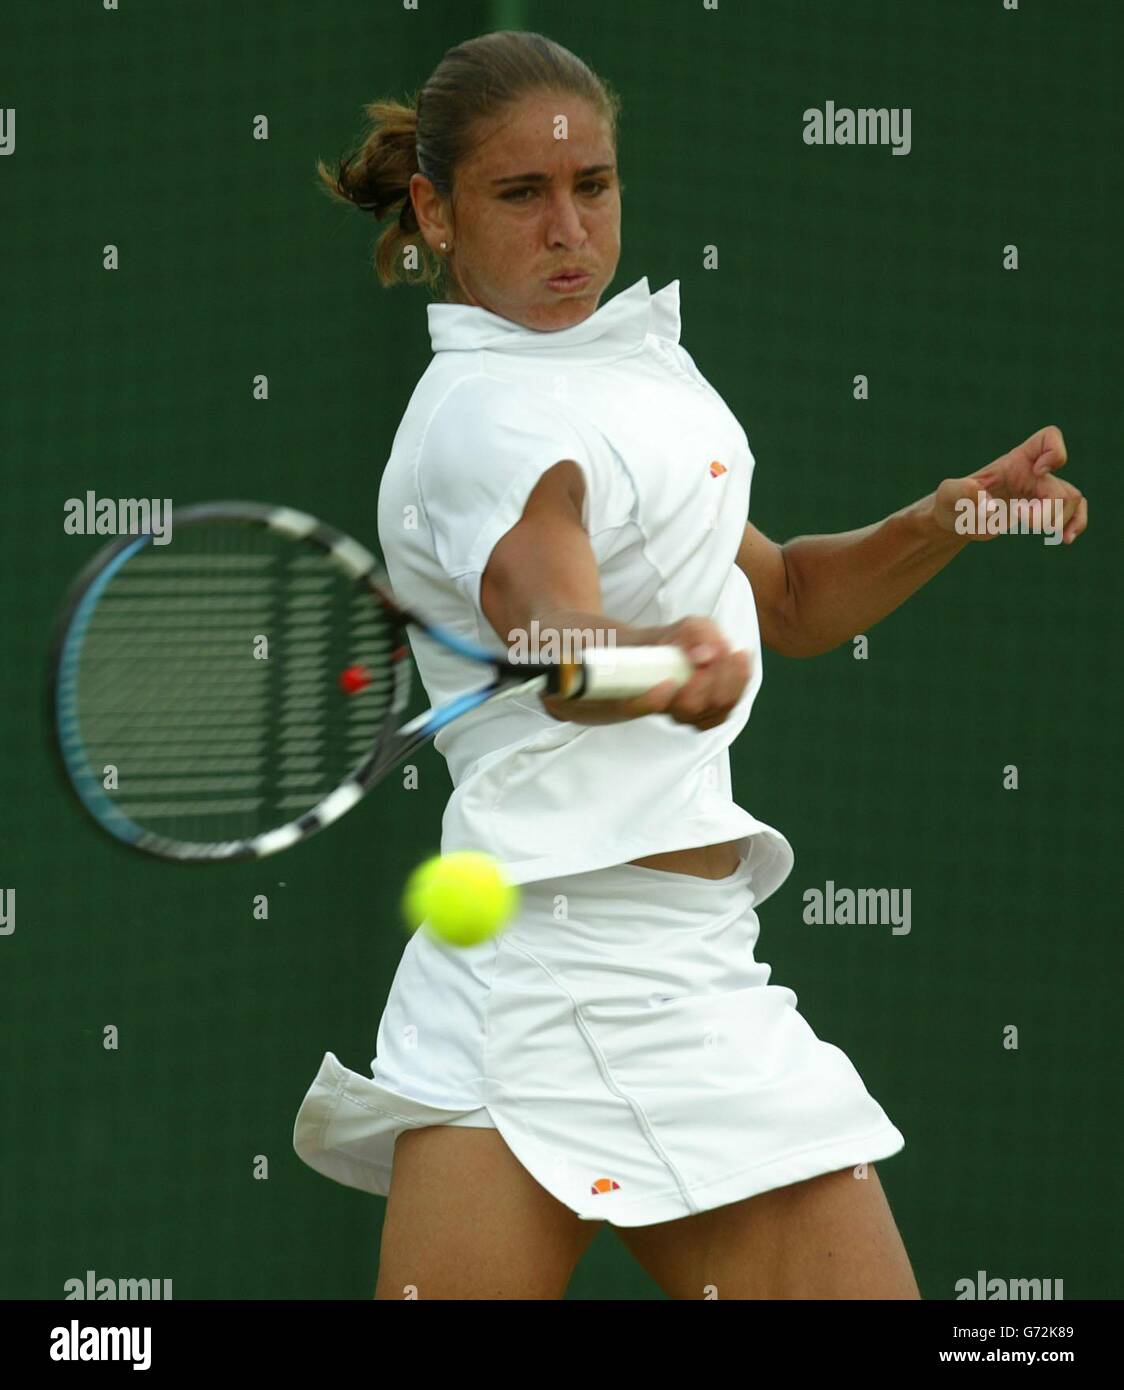 Rita Grande from Italy in action against Paola Suarez from Argentina in the  fourth round of the Ladies Single tournament of The Lawn Tennis  Championships at Wimbledon, London. EDITORIAL USE ONLY, NO